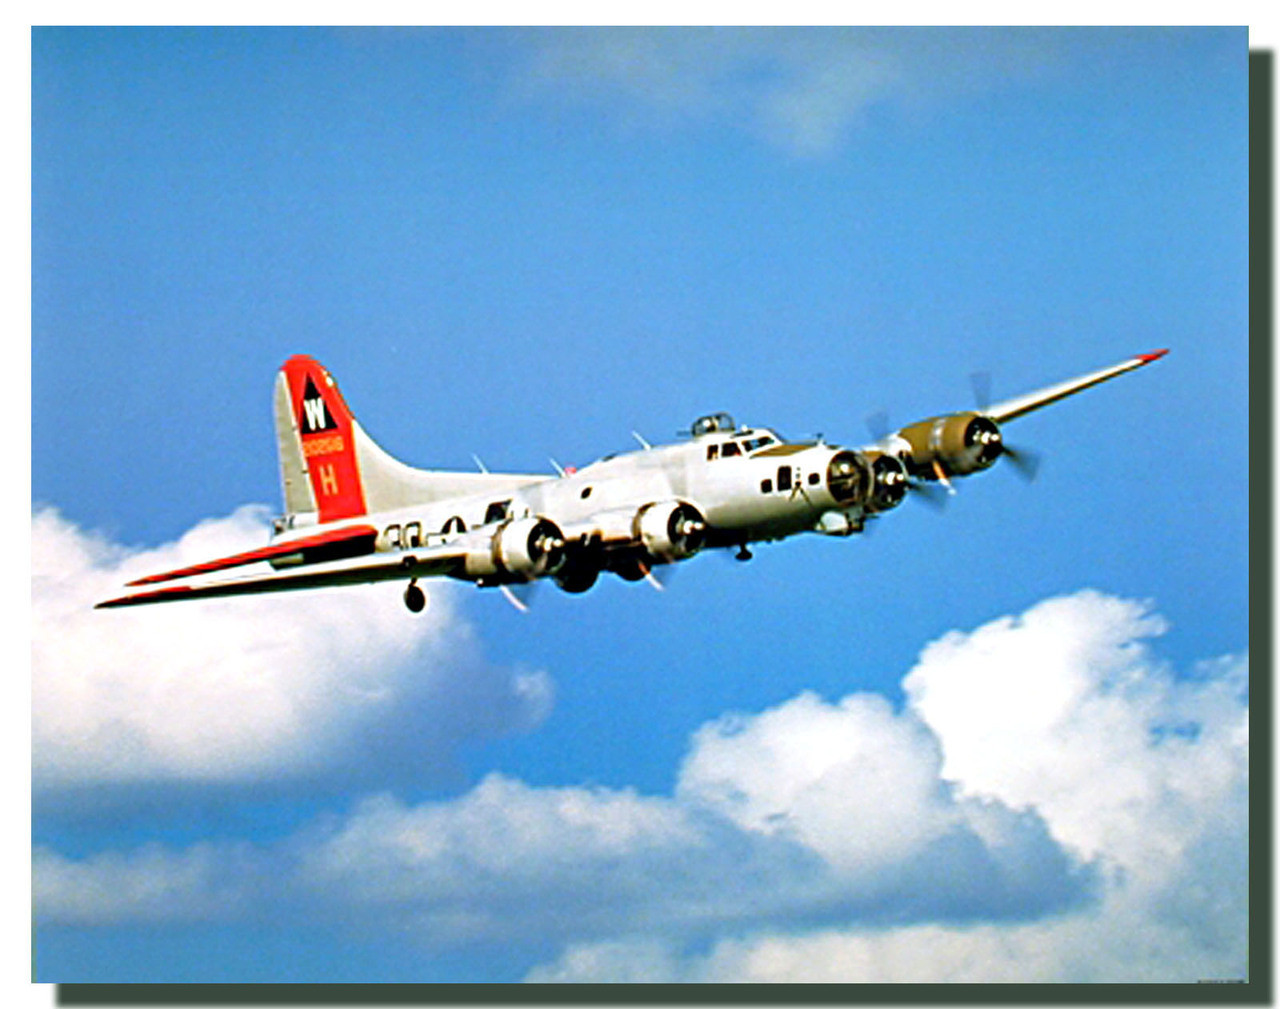 B-17 Airplane Poster | Airplane Posters | Aviation Posters
